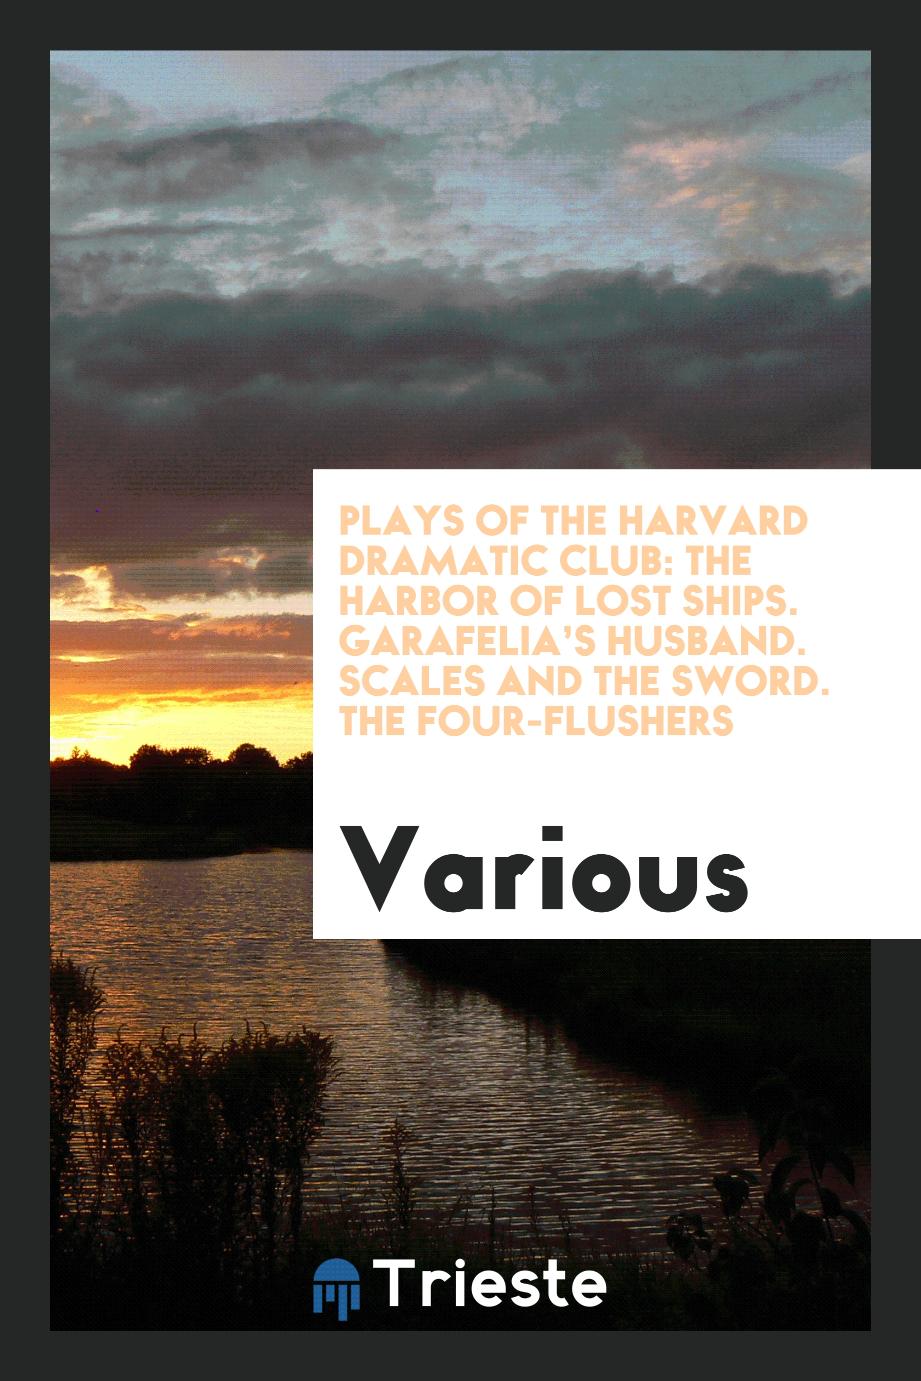 Plays of the Harvard Dramatic Club: The Harbor of Lost Ships. Garafelia’s Husband. Scales and the Sword. The Four-Flushers